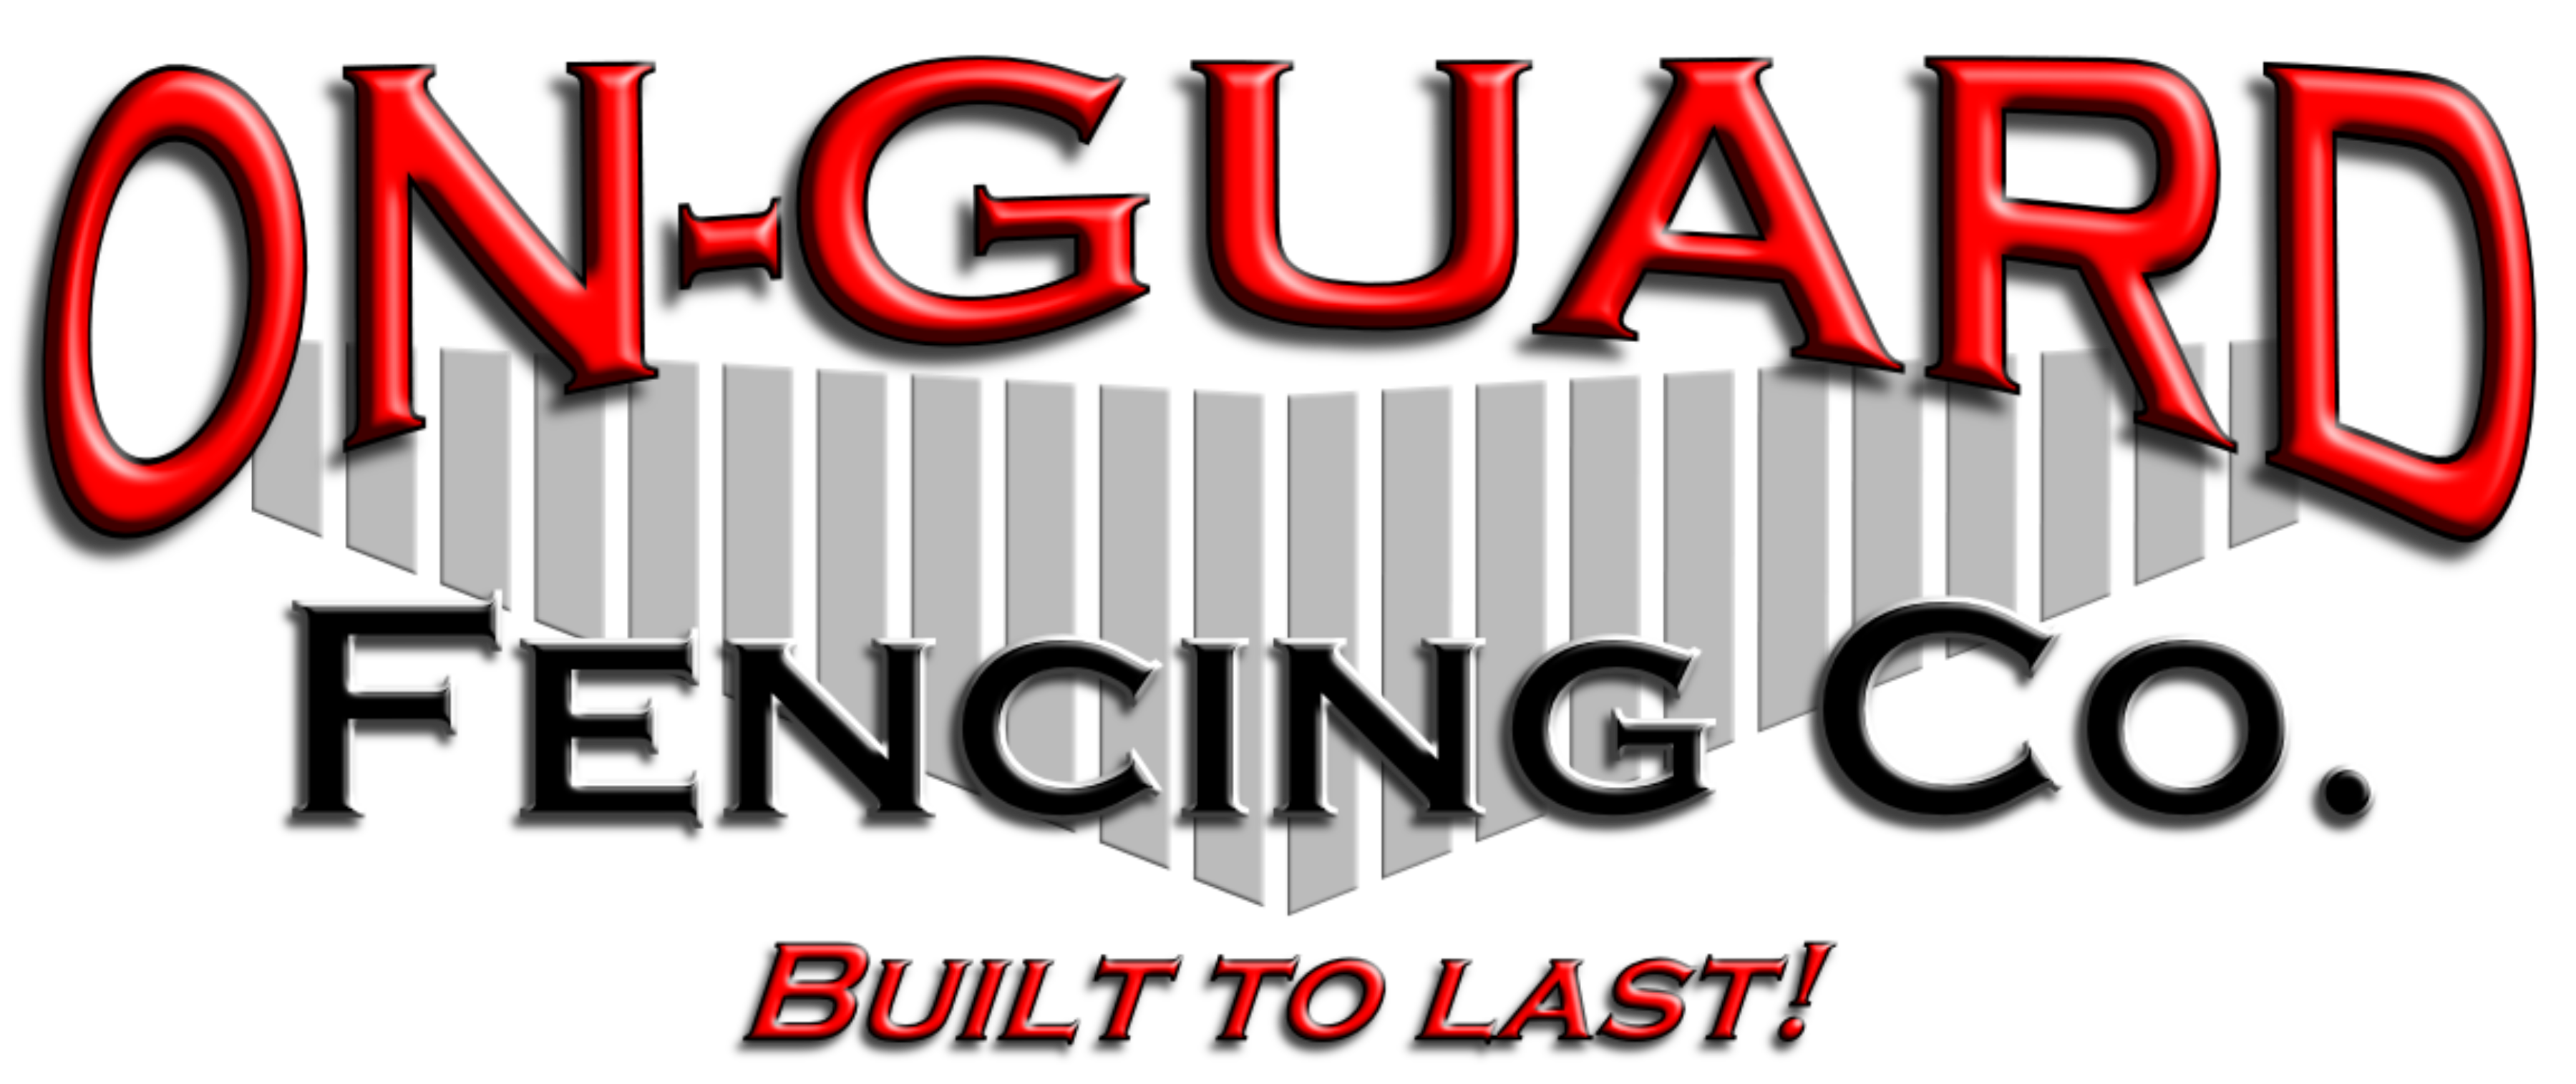 On-Guard Fencing Co.